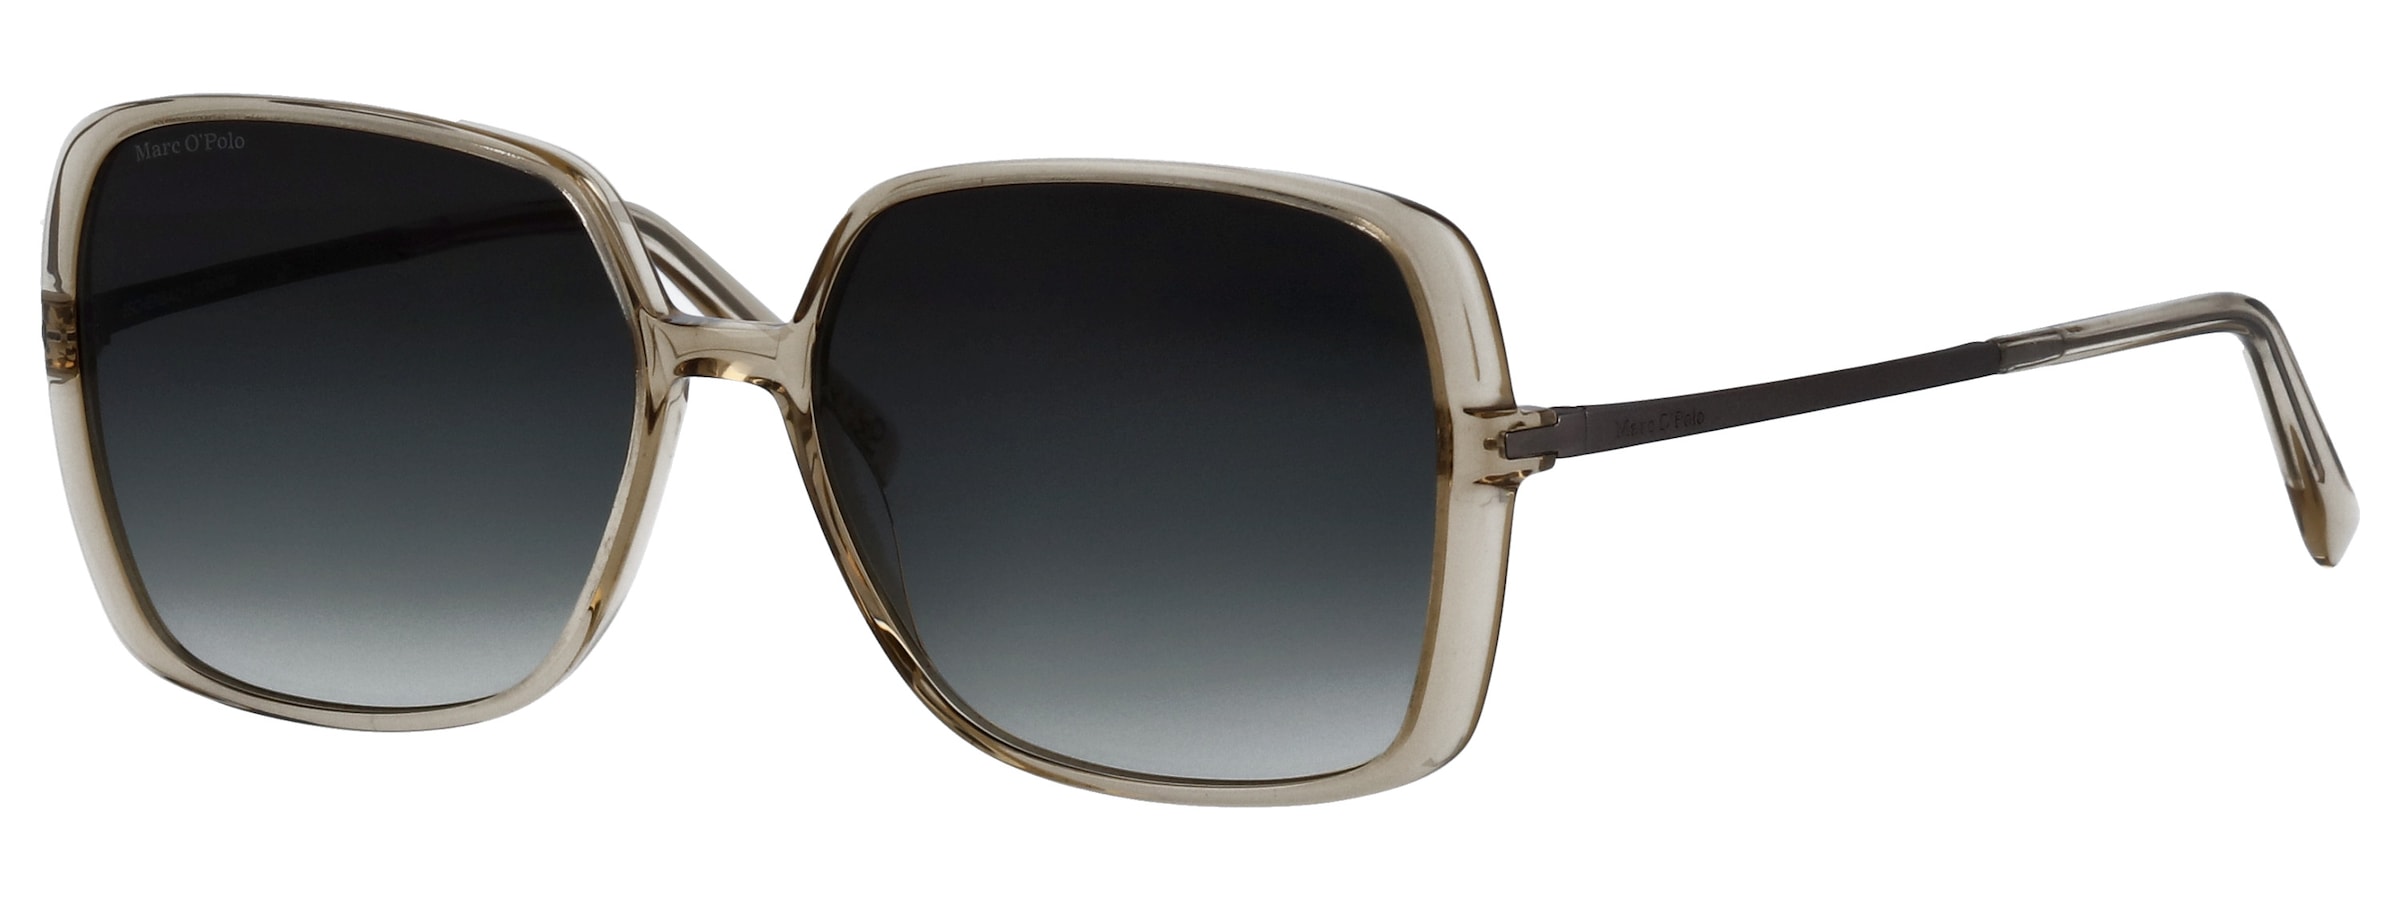 Marc OPolo Sonnenbrille "Modell 506191"